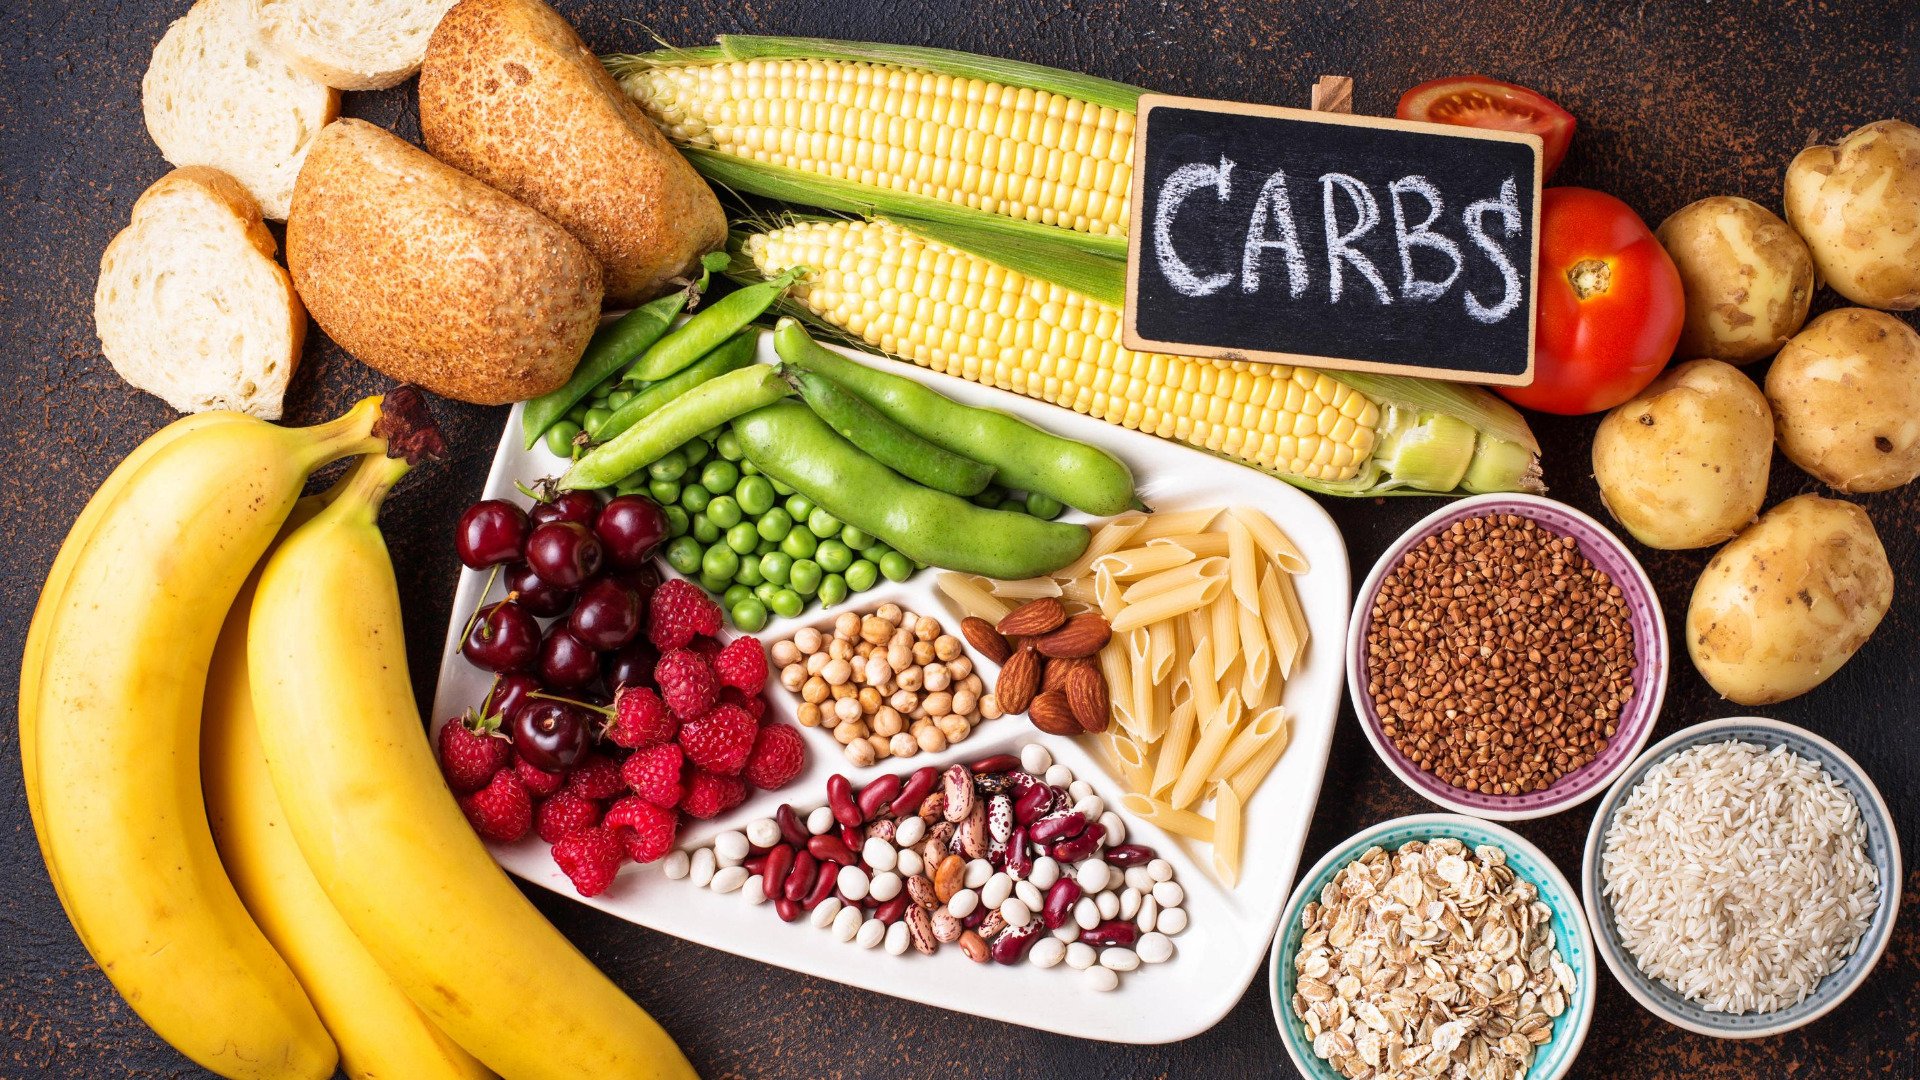 To Carb or Not to Carb: That is the Question